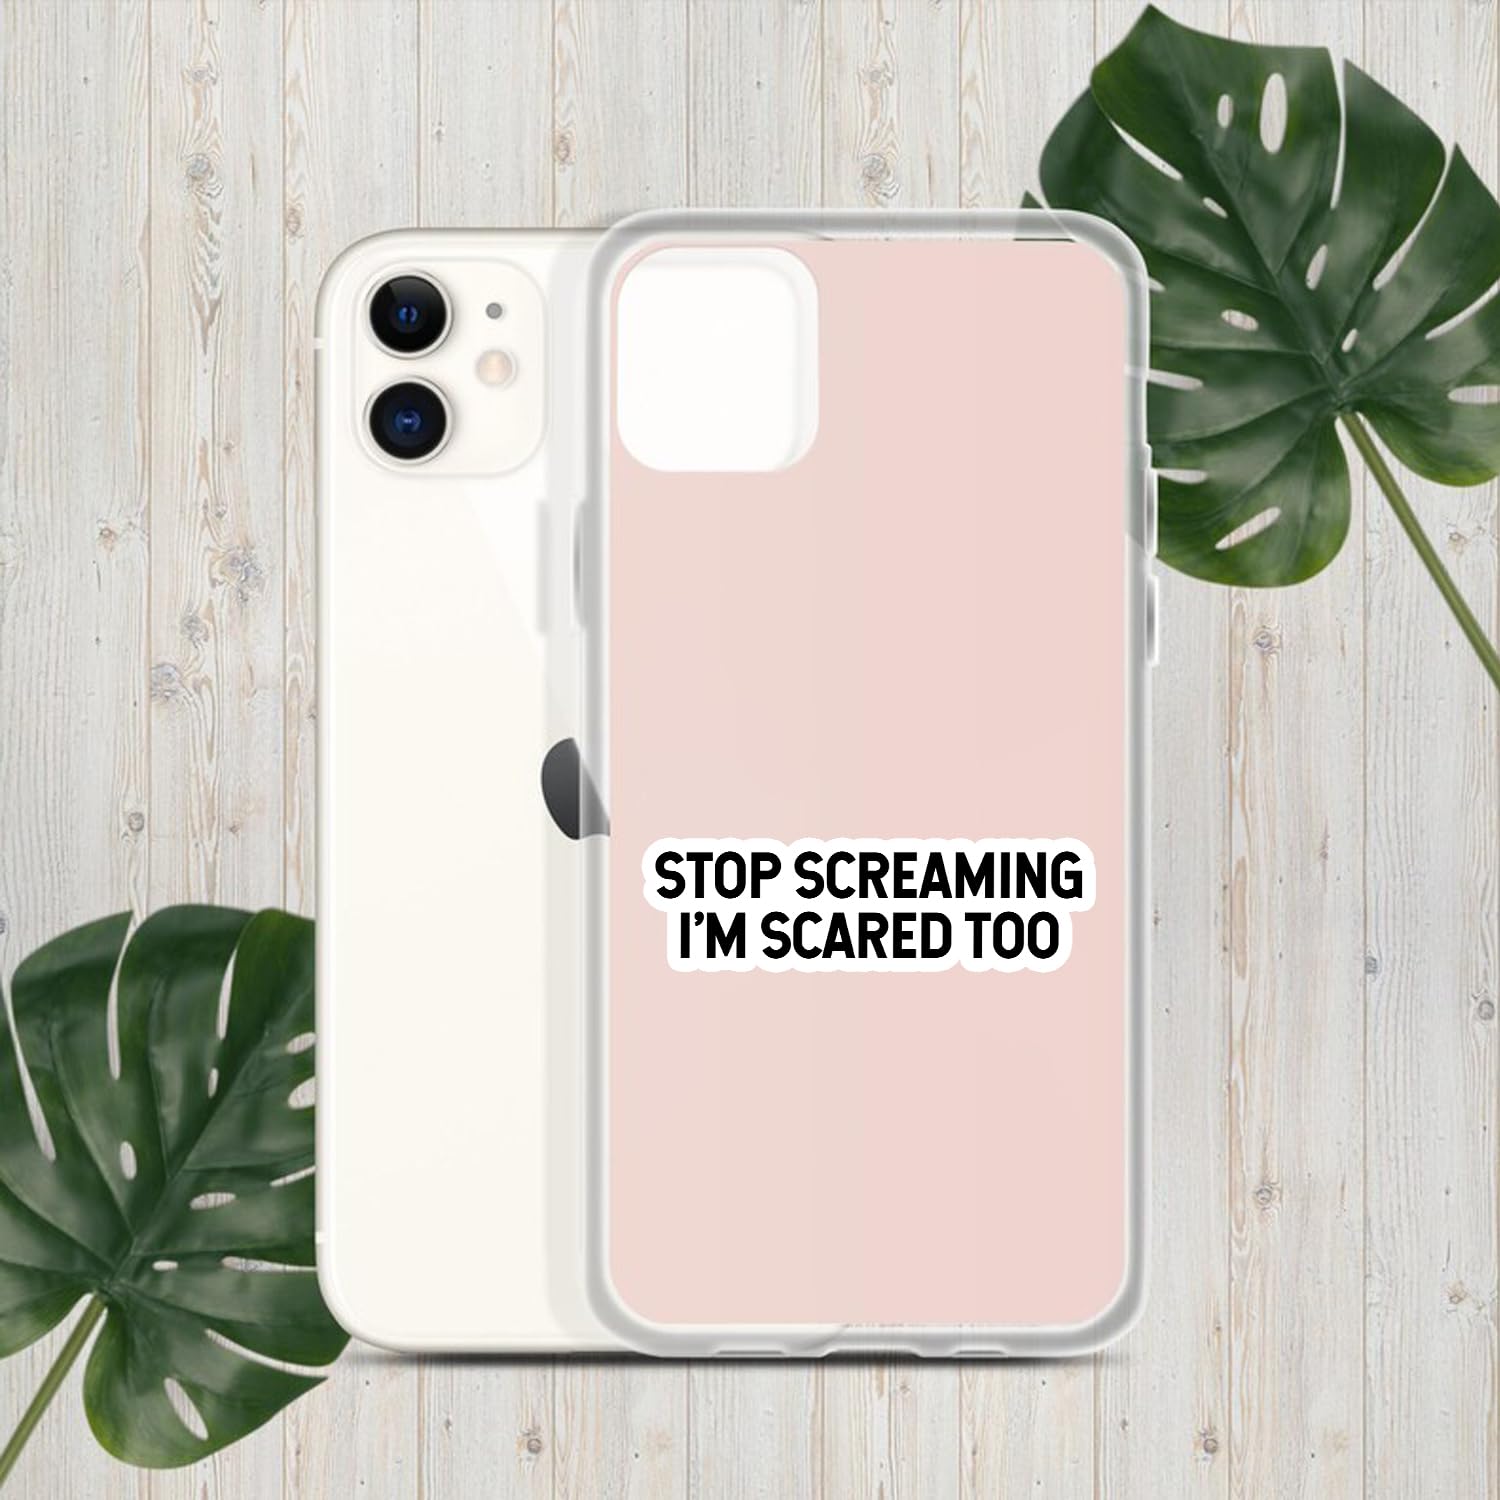 Stop Screaming I'm Scared Too Sticker, Medical Sticker, Paramedic Doctor Sticker, Paramedic Sticker, Water Assitant Die-Cut Vinyl Funny Decals for Laptop, Phone, Water Bottles, Kindle Sticker